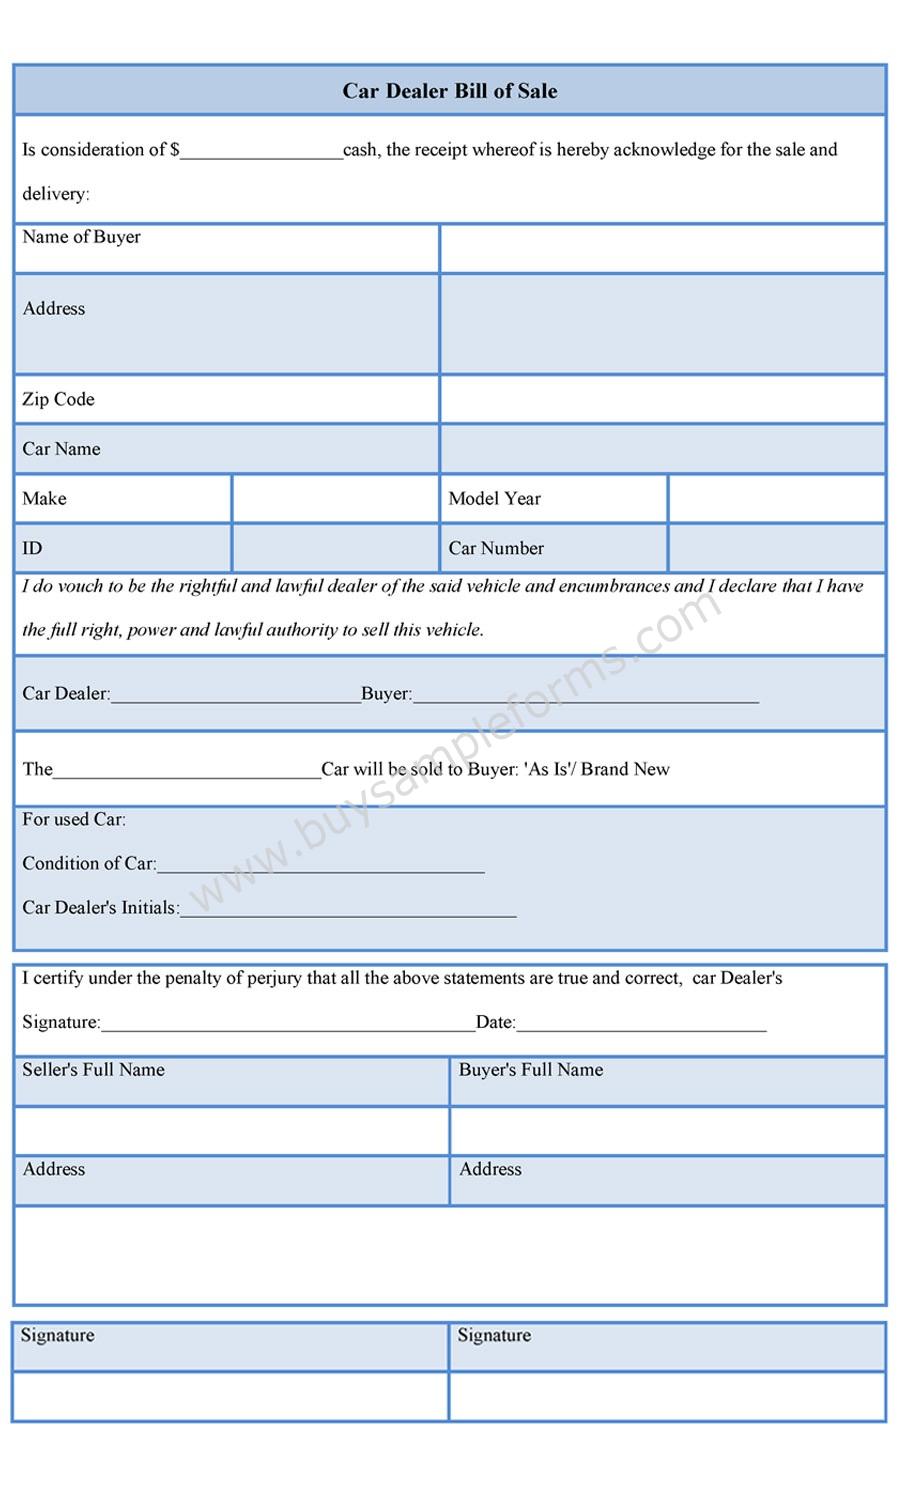 2018 Firearm Bill Of Sale Form Fillable, Printable Pdf & Forms 